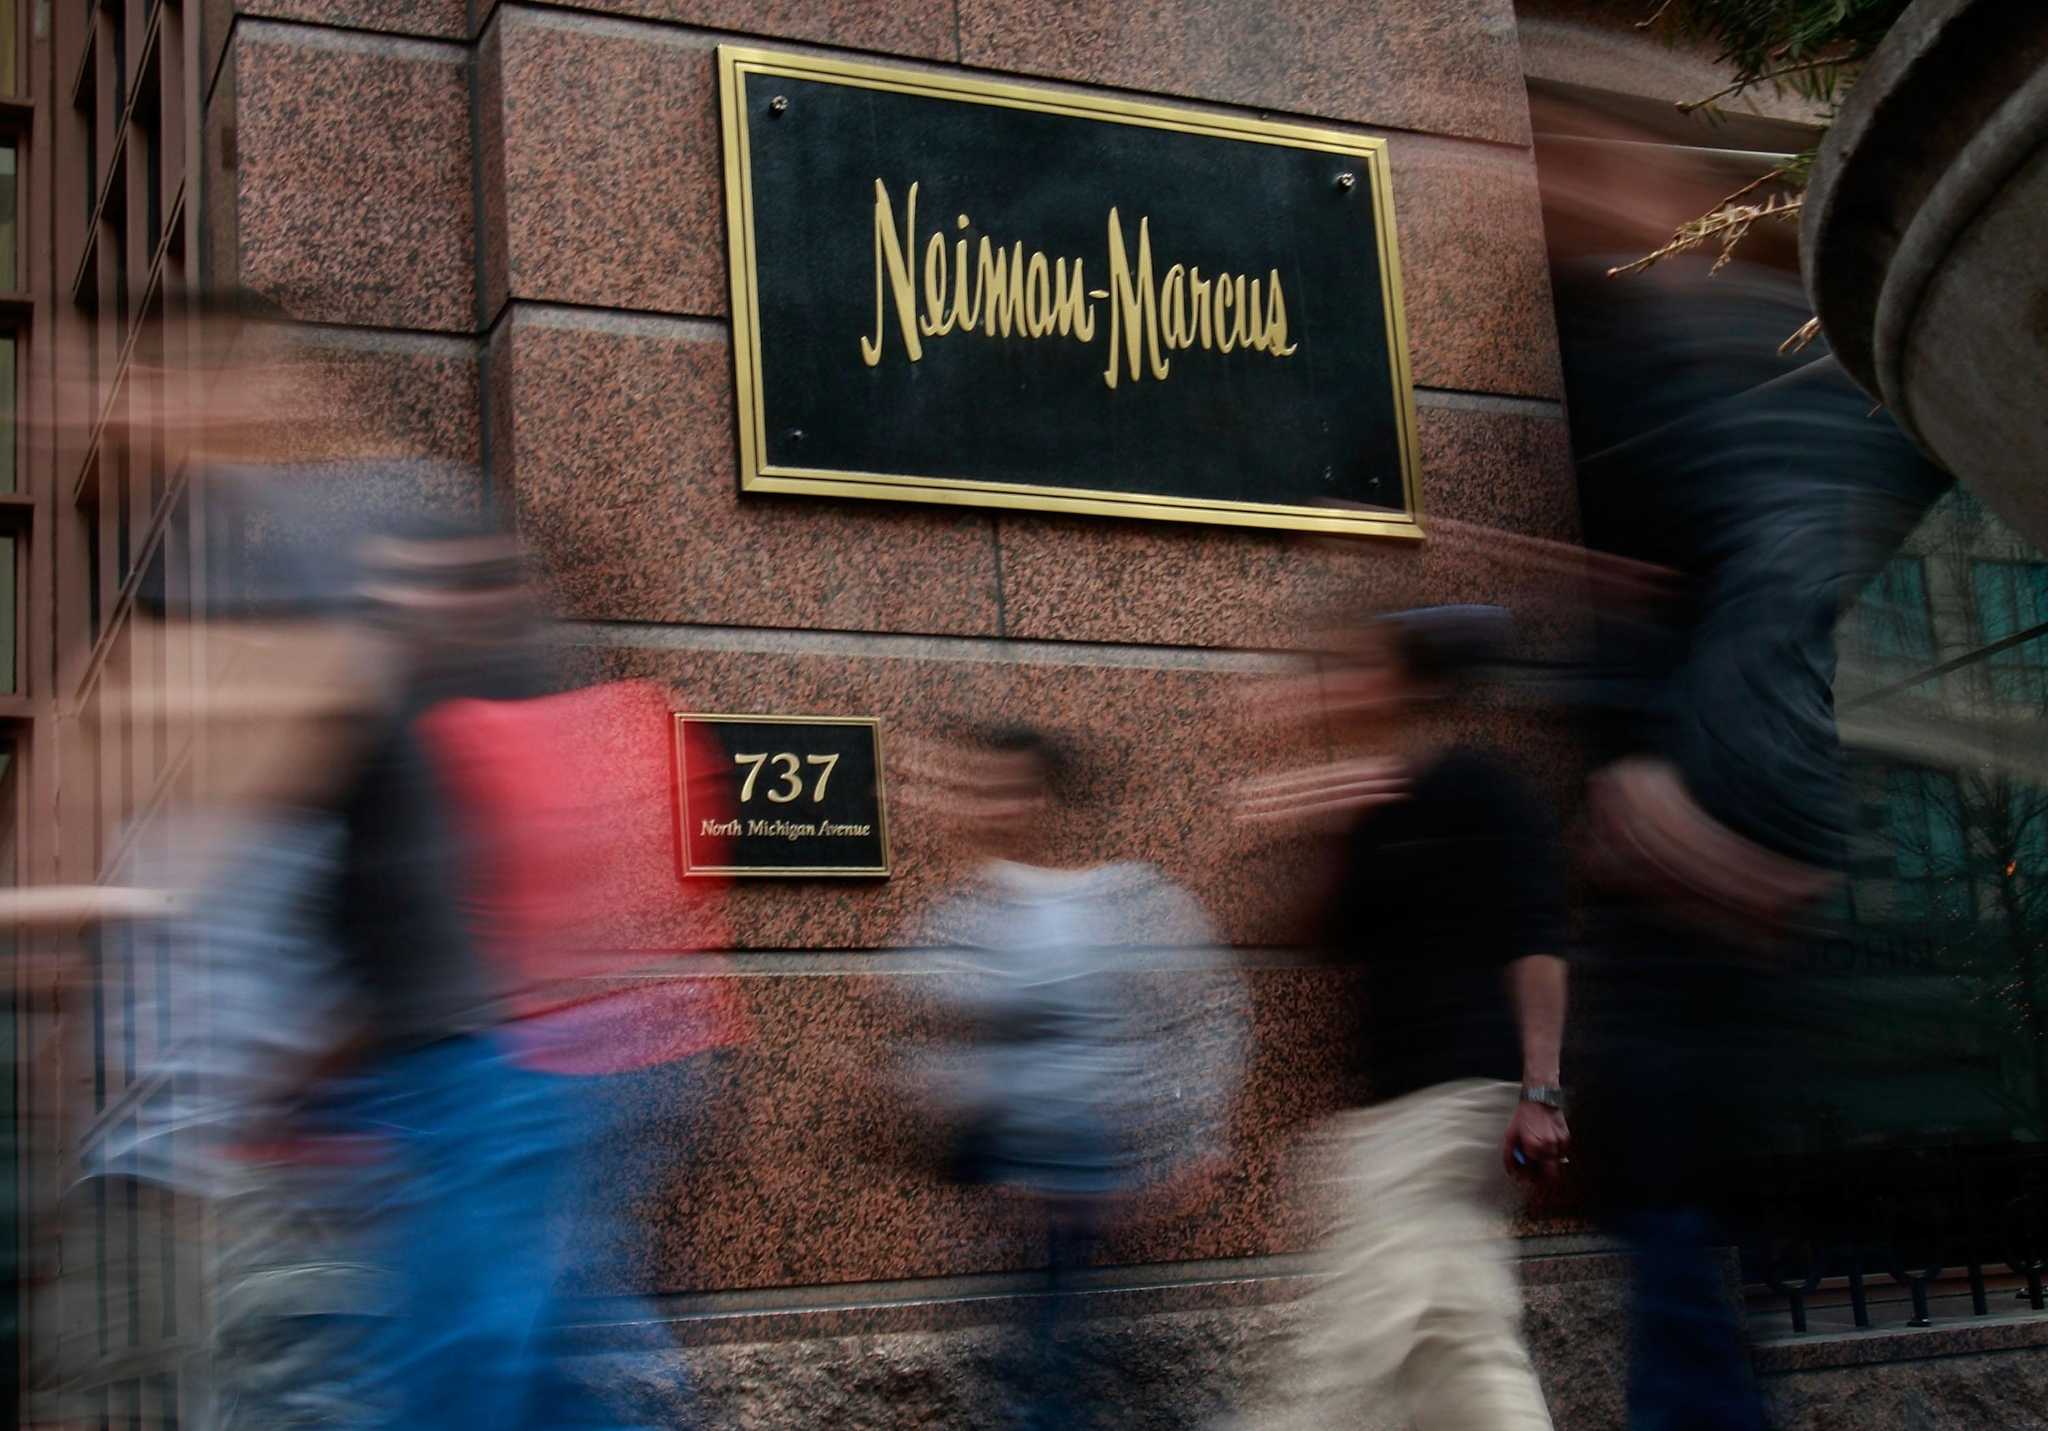 Neiman Marcus in Las Vegas News Photo - Getty Images